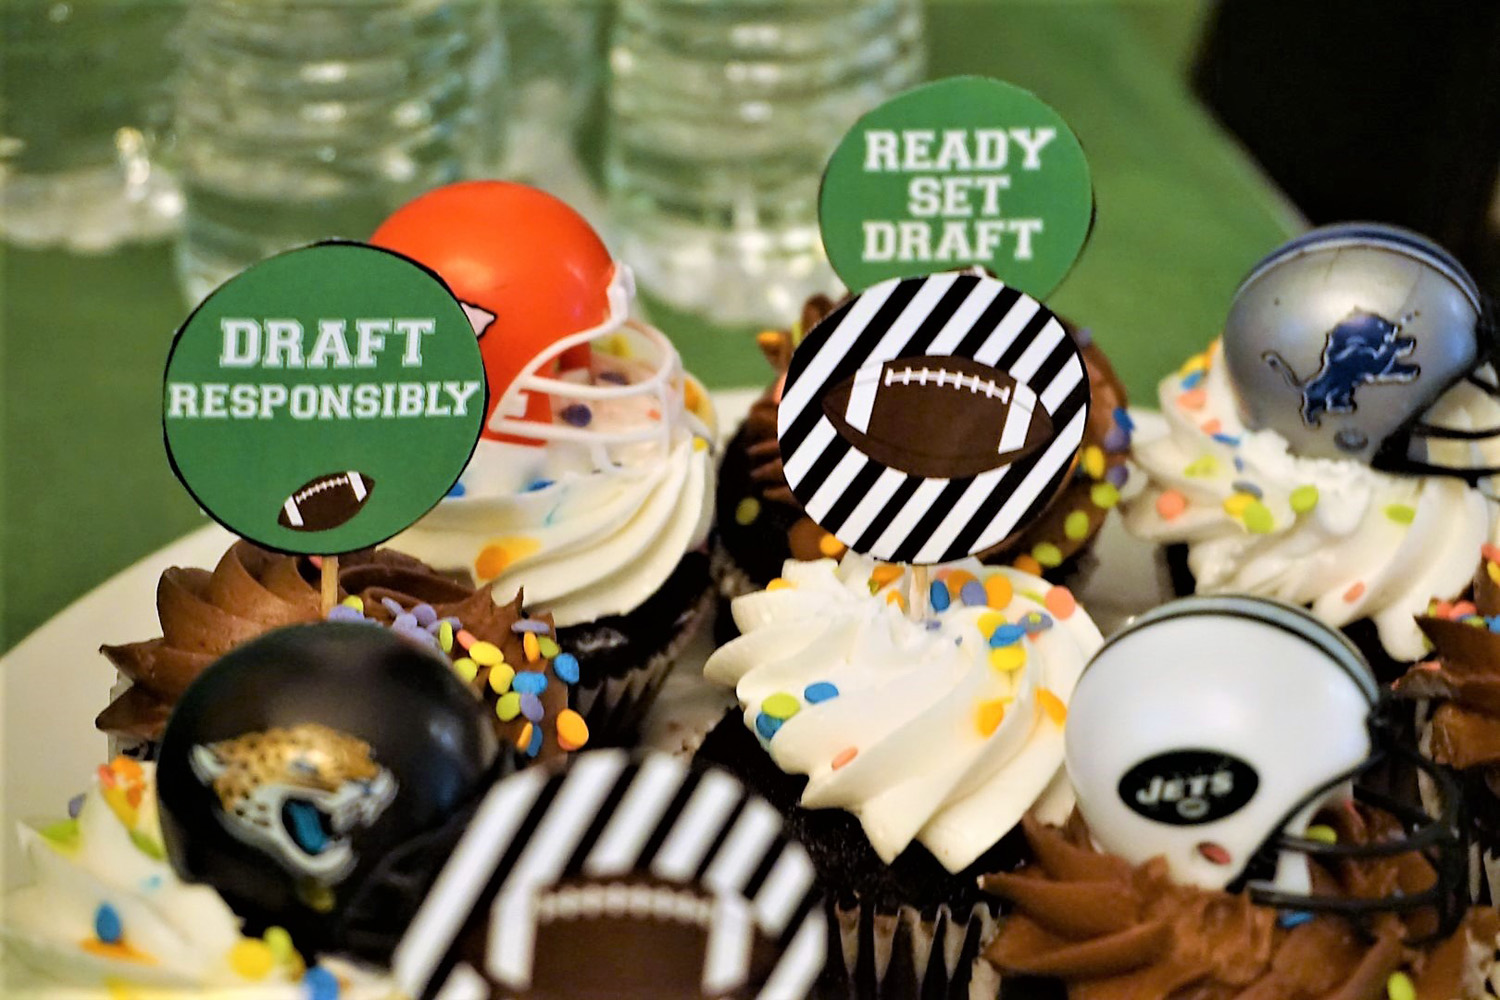  Use football themed printables to decorate cupcakes for fantasy football draft 